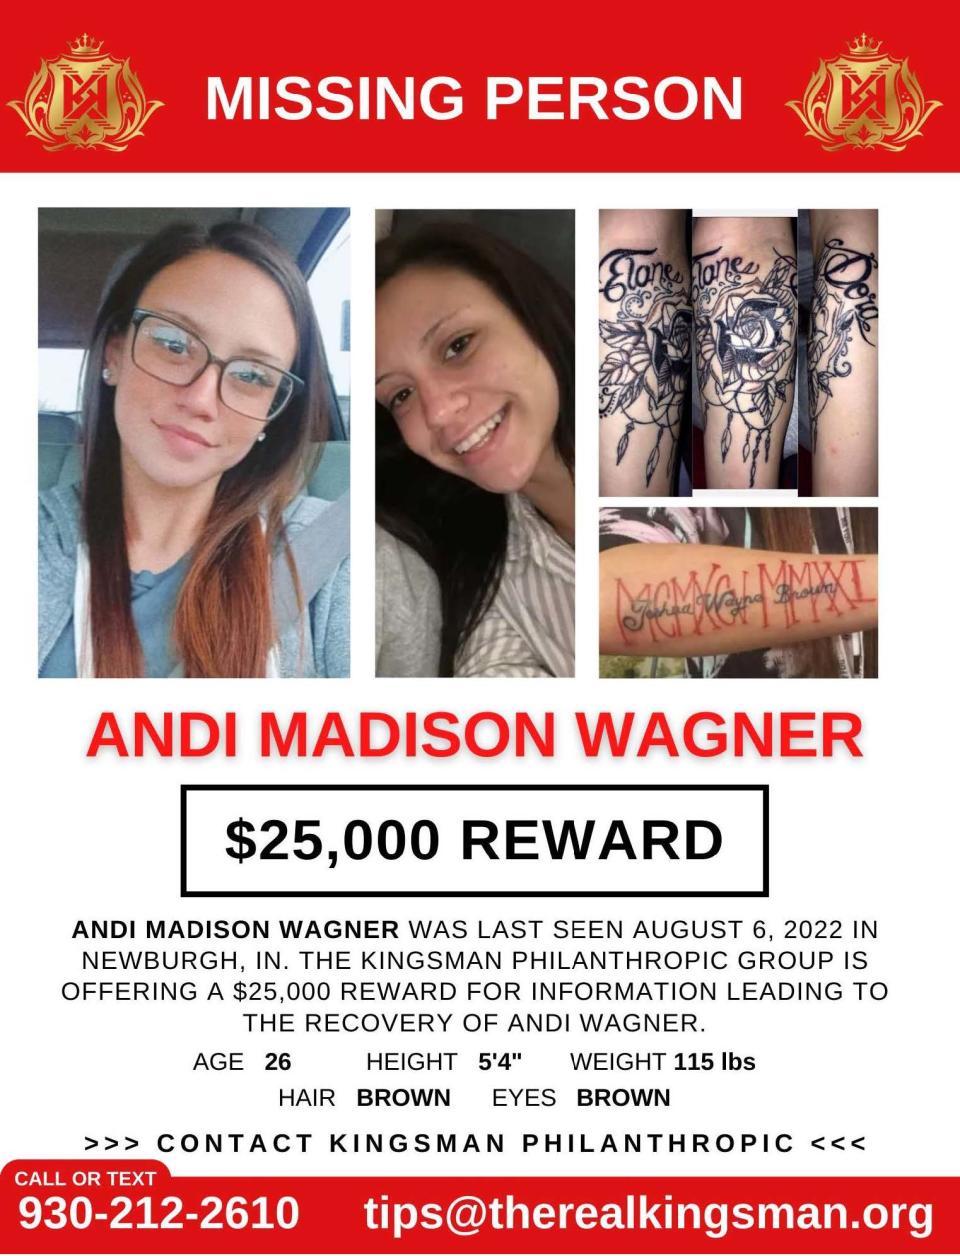 A missing person flyer prepared and distributed by Kingsman Philanthropic Corp. displays photographs of Andi Wagner and highlights a newly offered $25,000 reward for information.